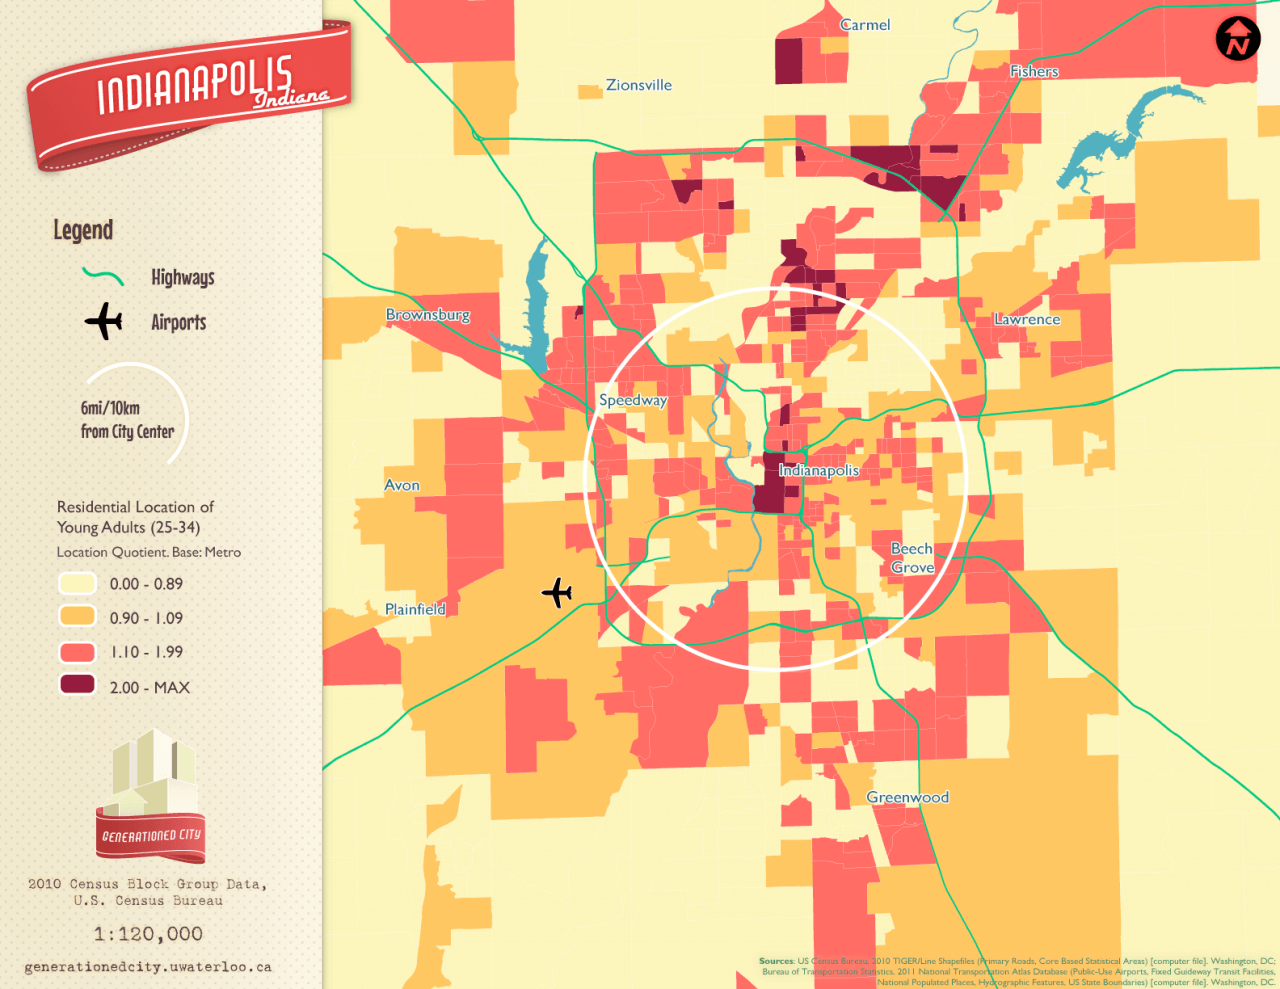 Residential location of young adults in Indianapolis.